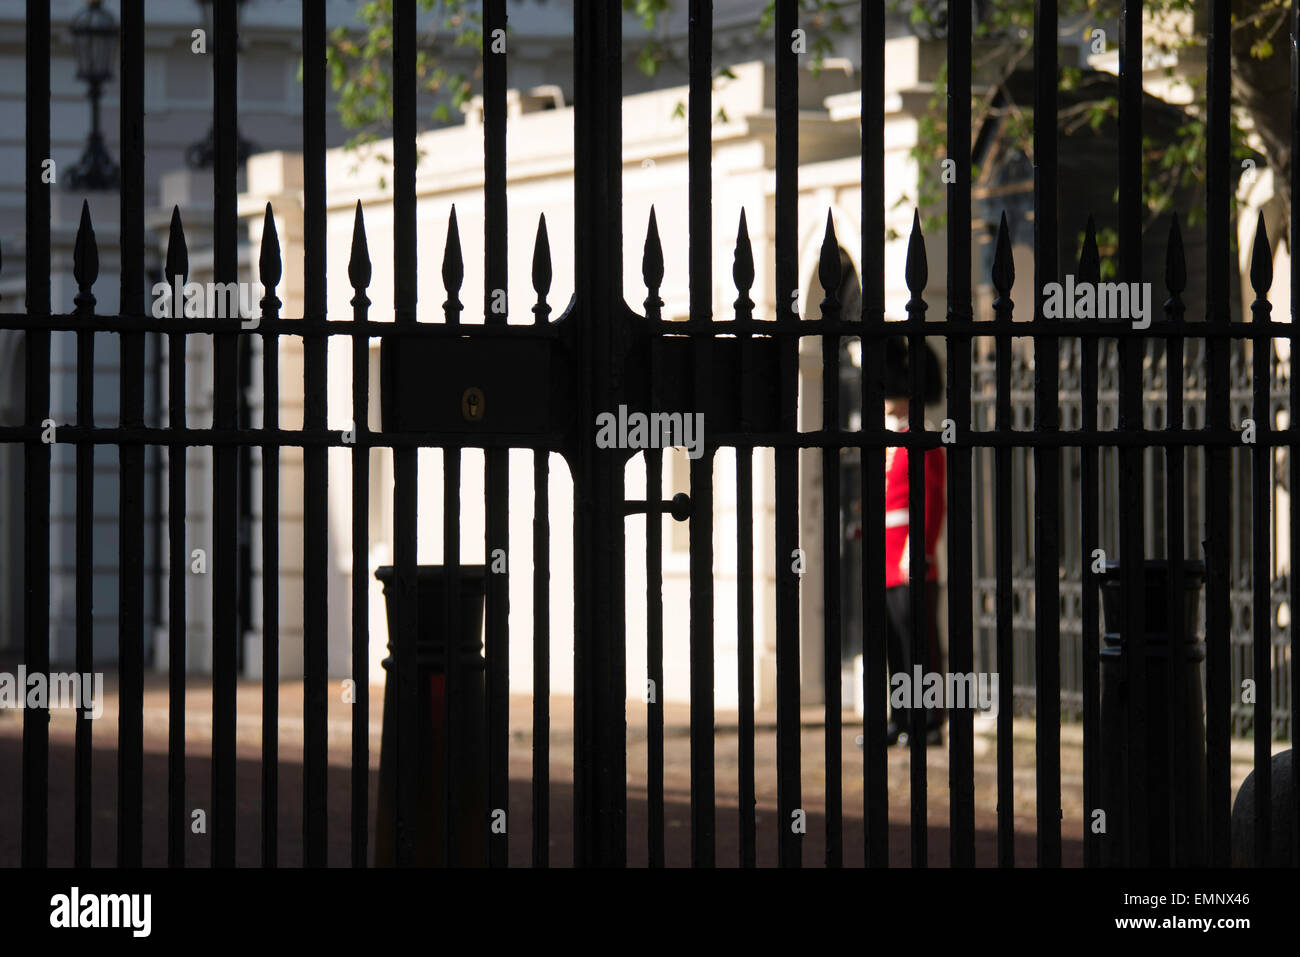 The closed iron gate at St james palace, London, with a soldier in ceremonial uniform on guard inside it. Stock Photo